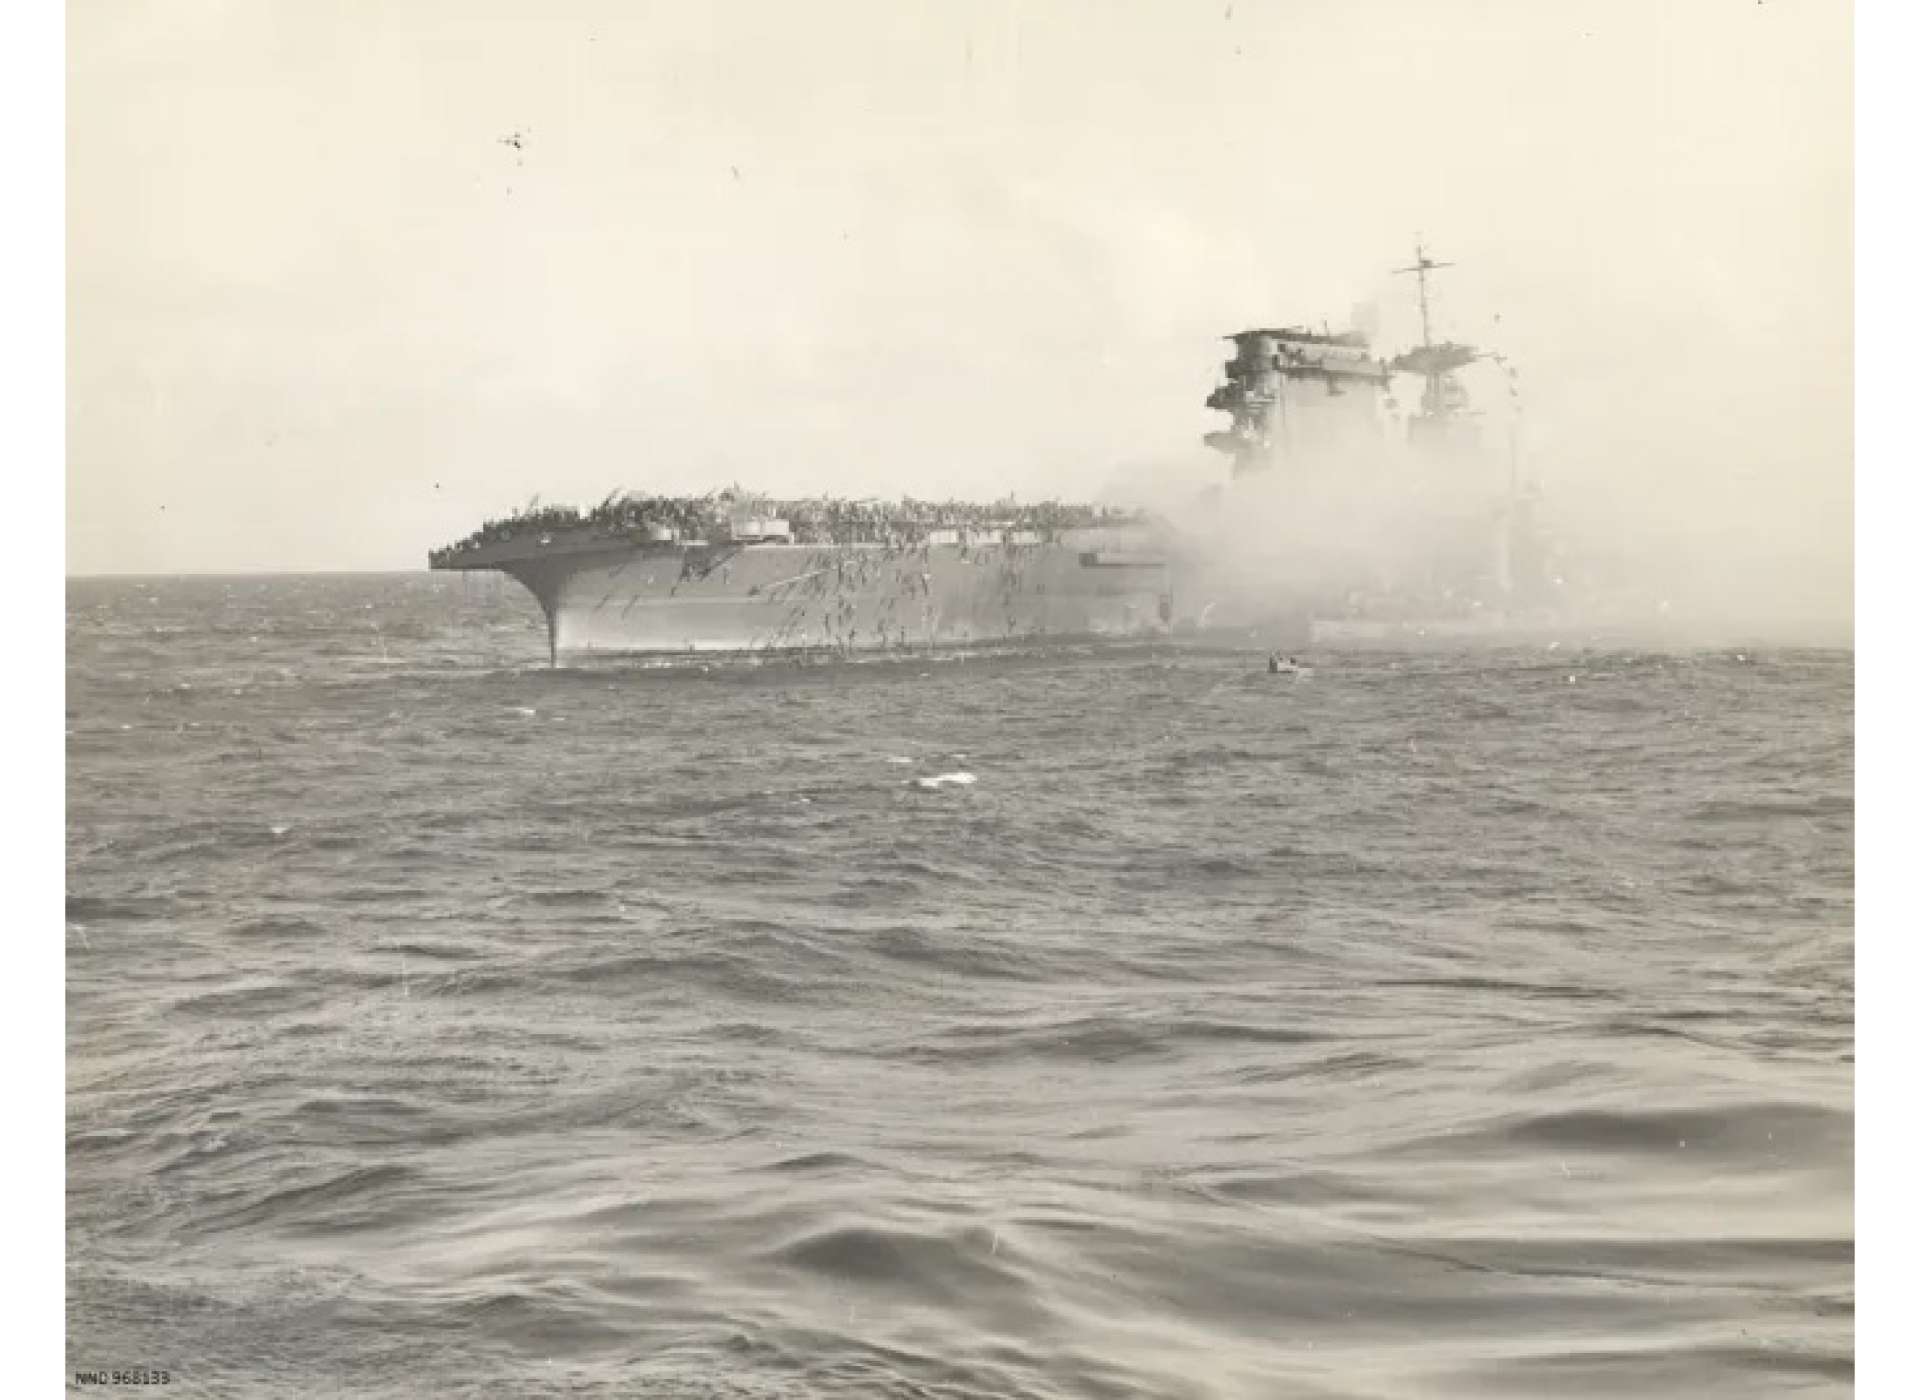 Lifeboats evacuating crew from USS Lexington. Photo courtesy of the National Archives and Records Administration.